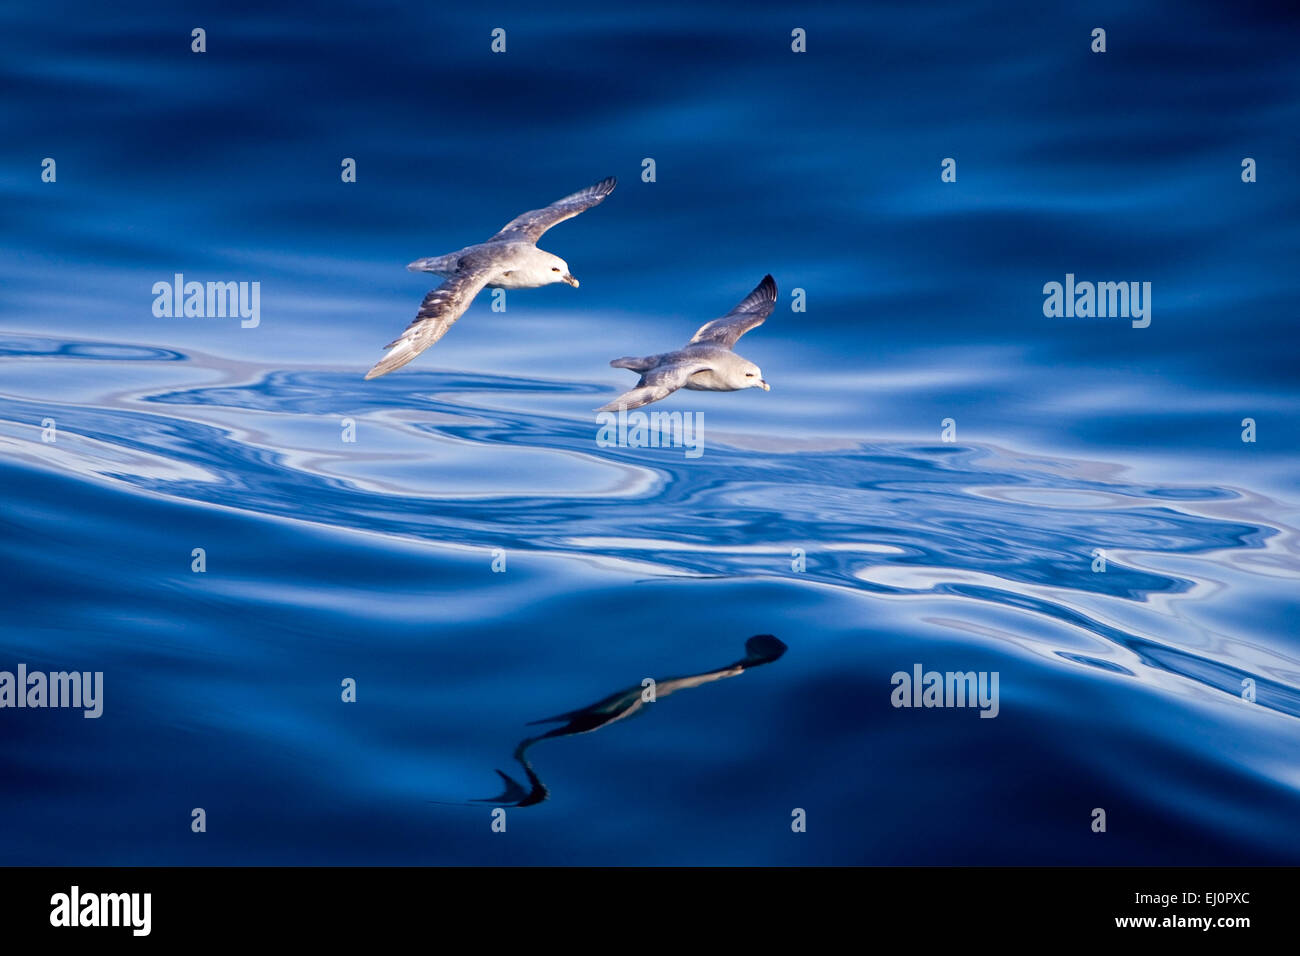 fulmars, glide, North Sea, Northern Norway, Norway, EU, Europe, 2, pair, two, sea birds, gliding, blue sea, peace, tranquillity, Stock Photo